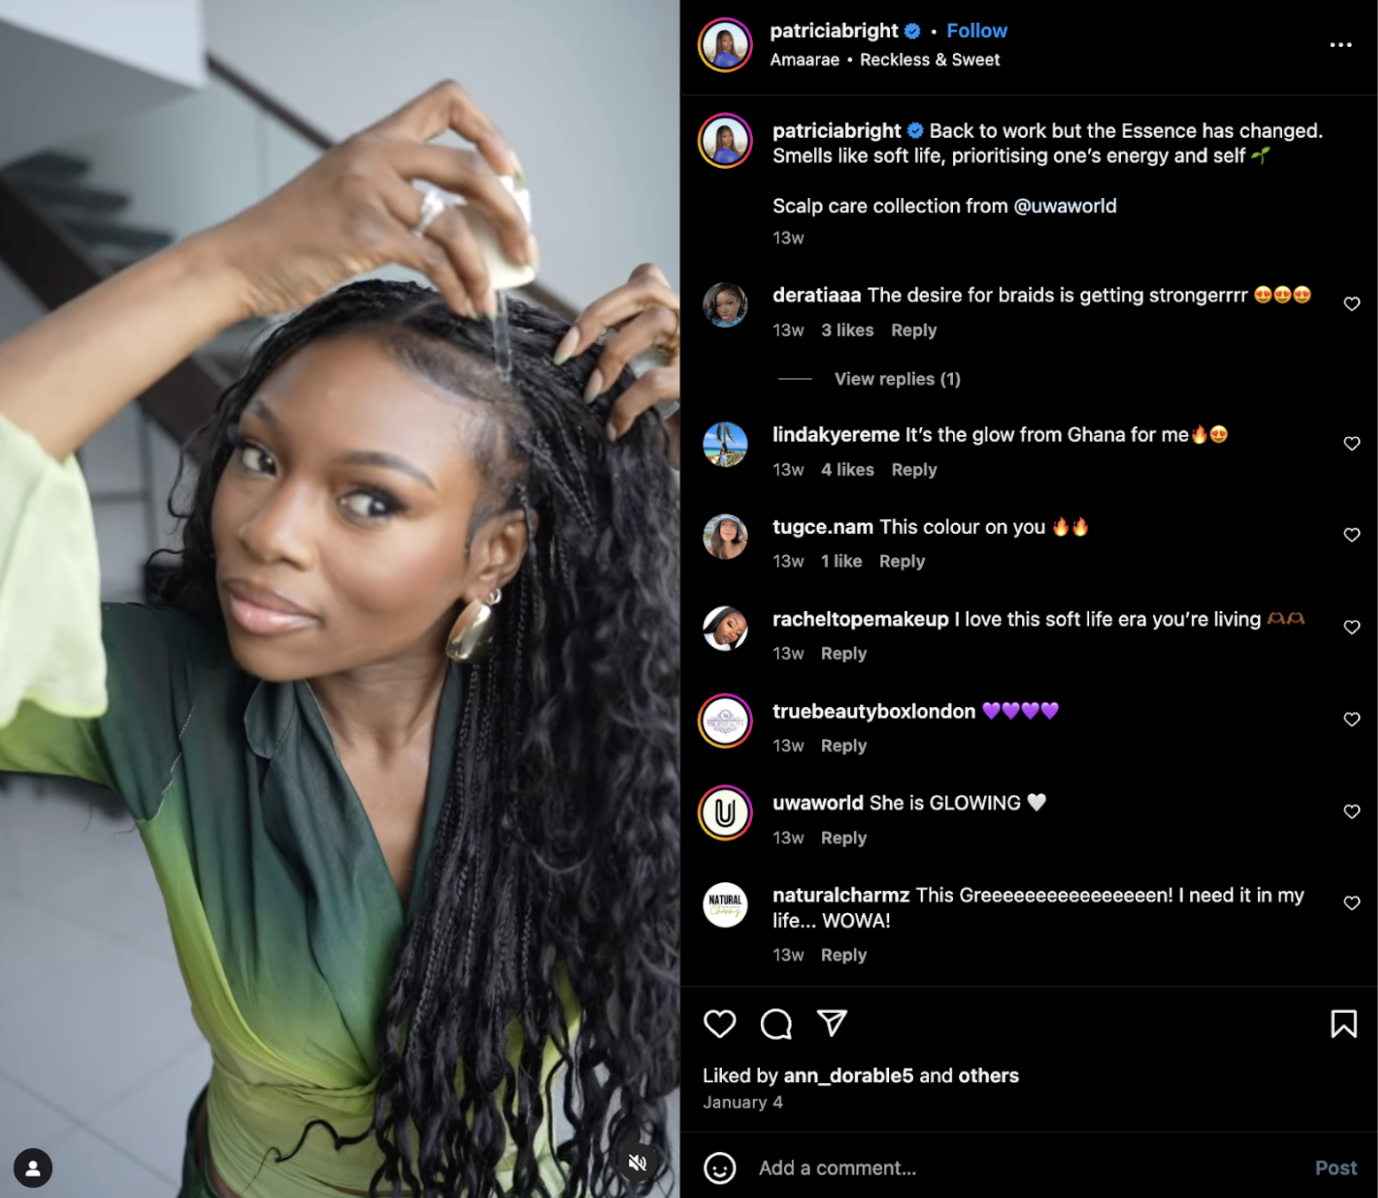 Patricia applying hair product in an Instagram post